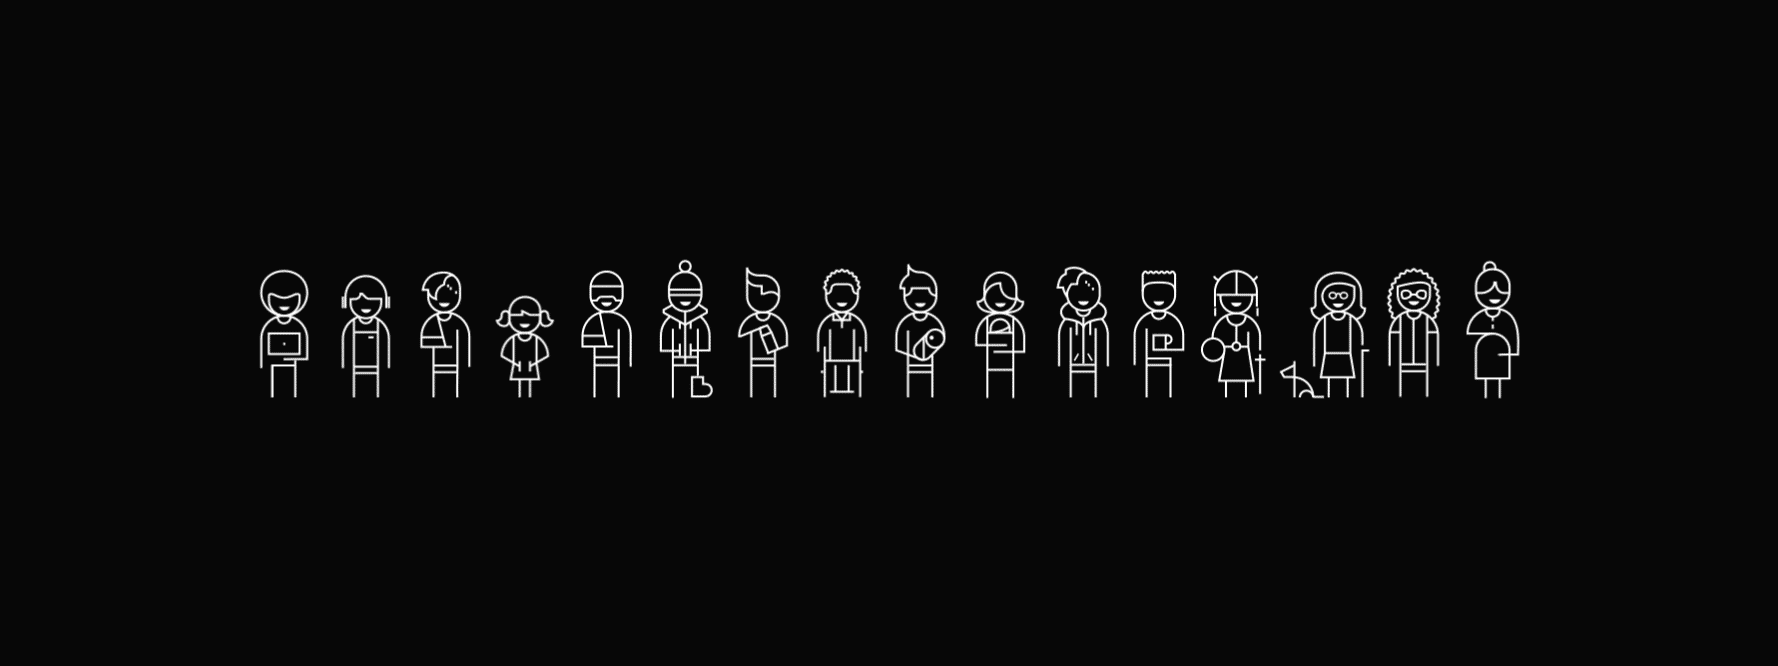 An animated line of icons that represent diverse people welcoming you to Microsoft’s Inclusive Design web page.